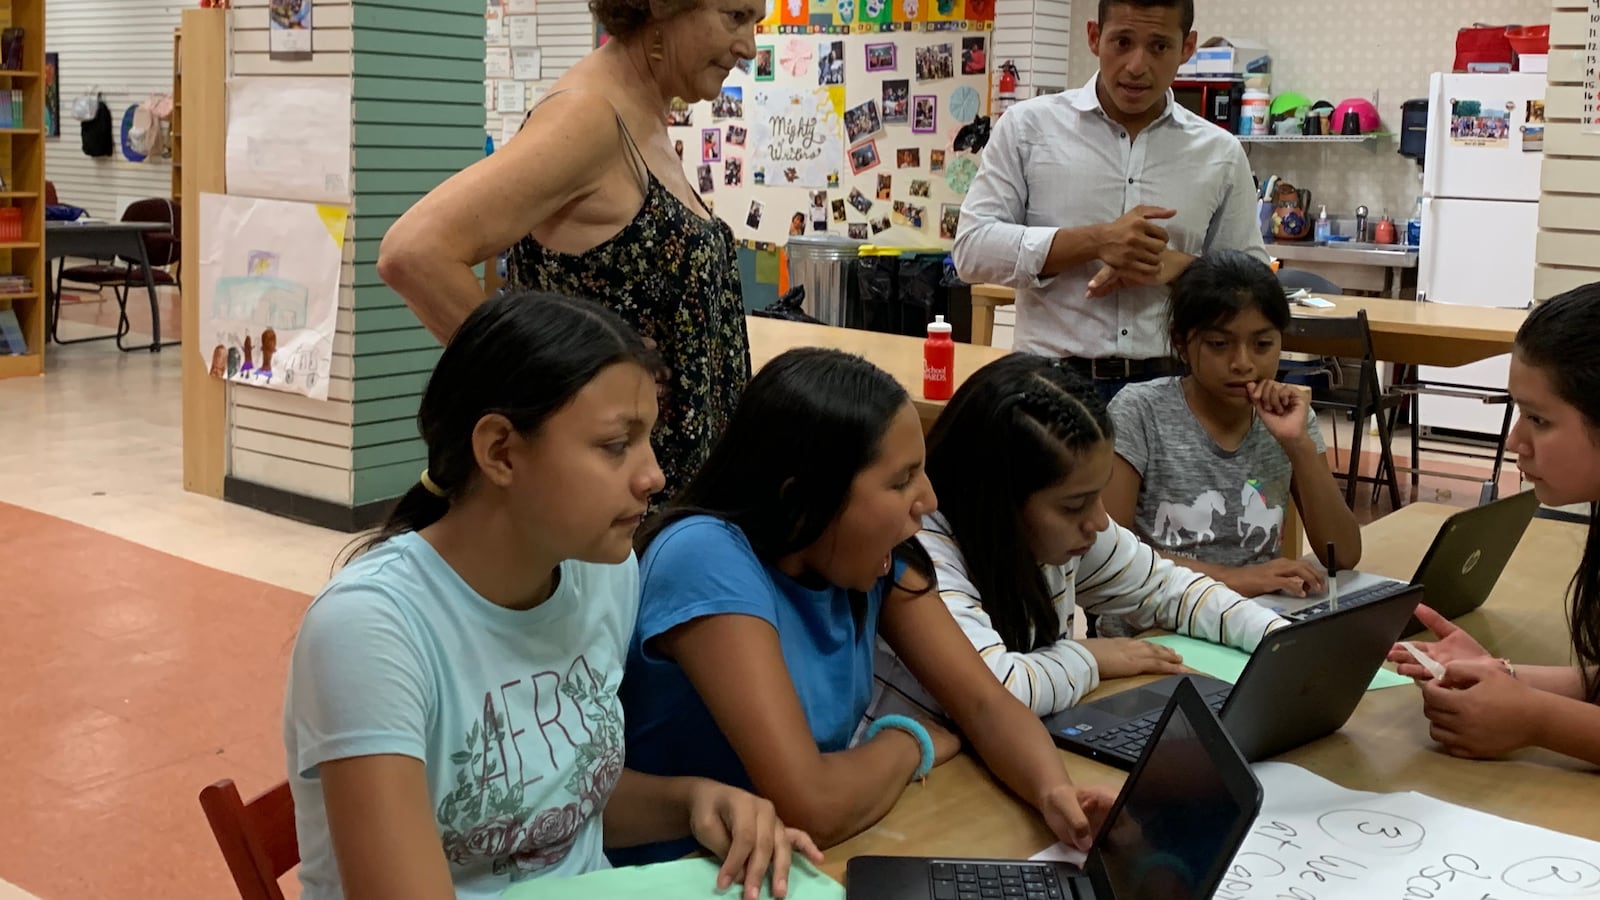 Students work on their writing at the El Futuro site of Mighty Writers with volunteer Sandee Mandel and Telemundo reporter Miguel Martinez-Valle.